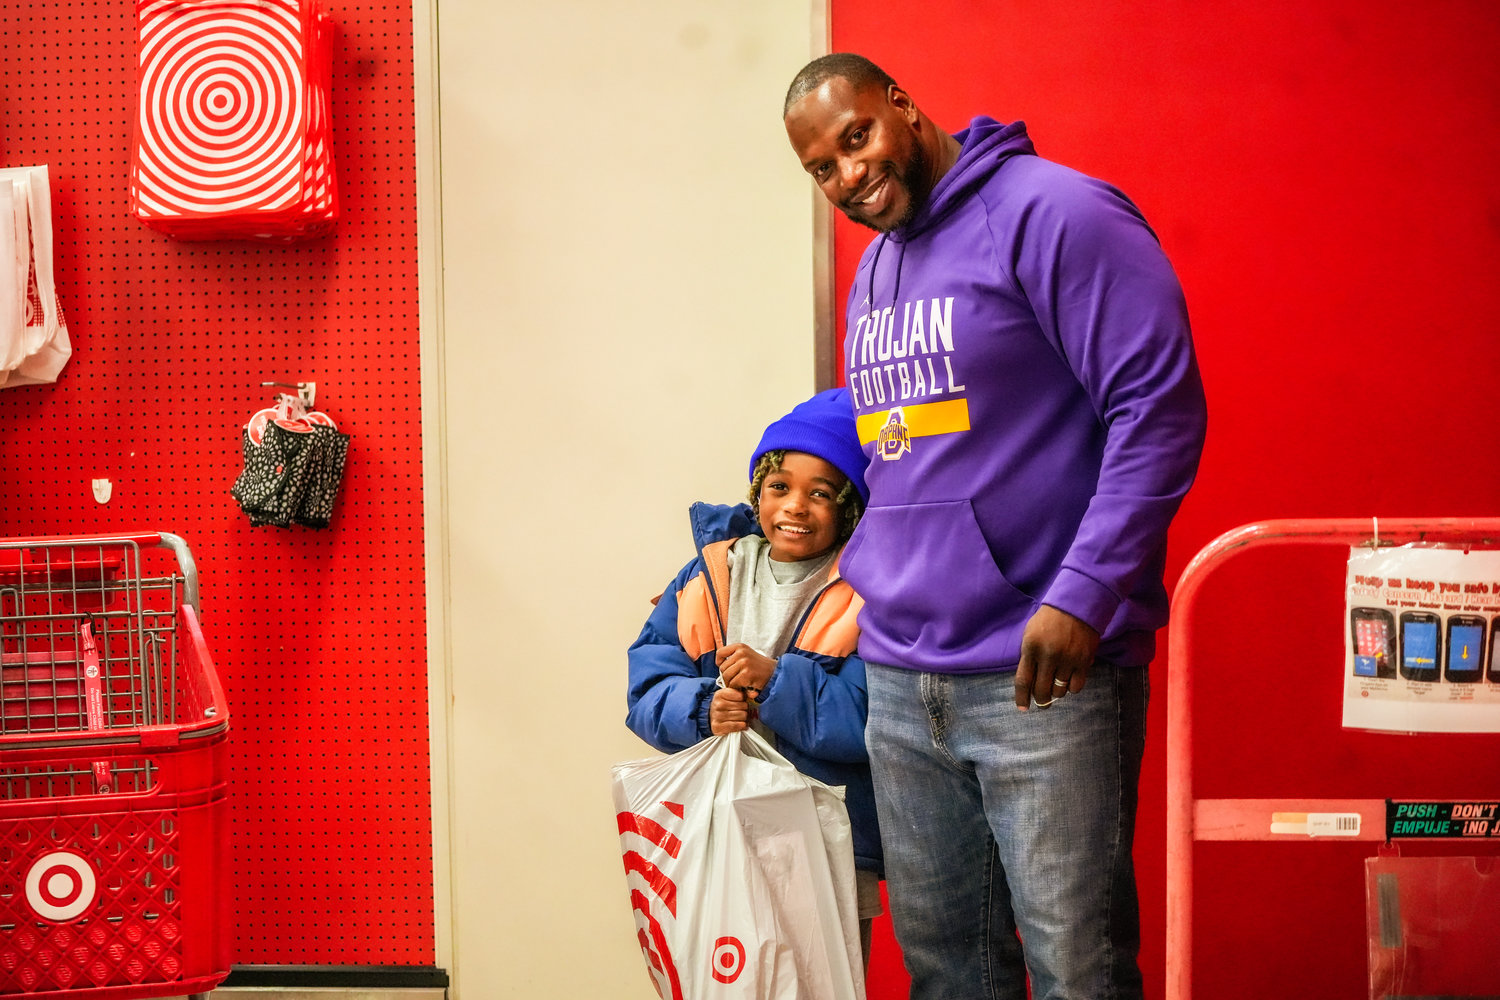 Twenty-five elementary/middle school children from the Daphne community got a free Christmas shopping spree at Target thanks to Kenny King Charities last Friday, Dec. 23.